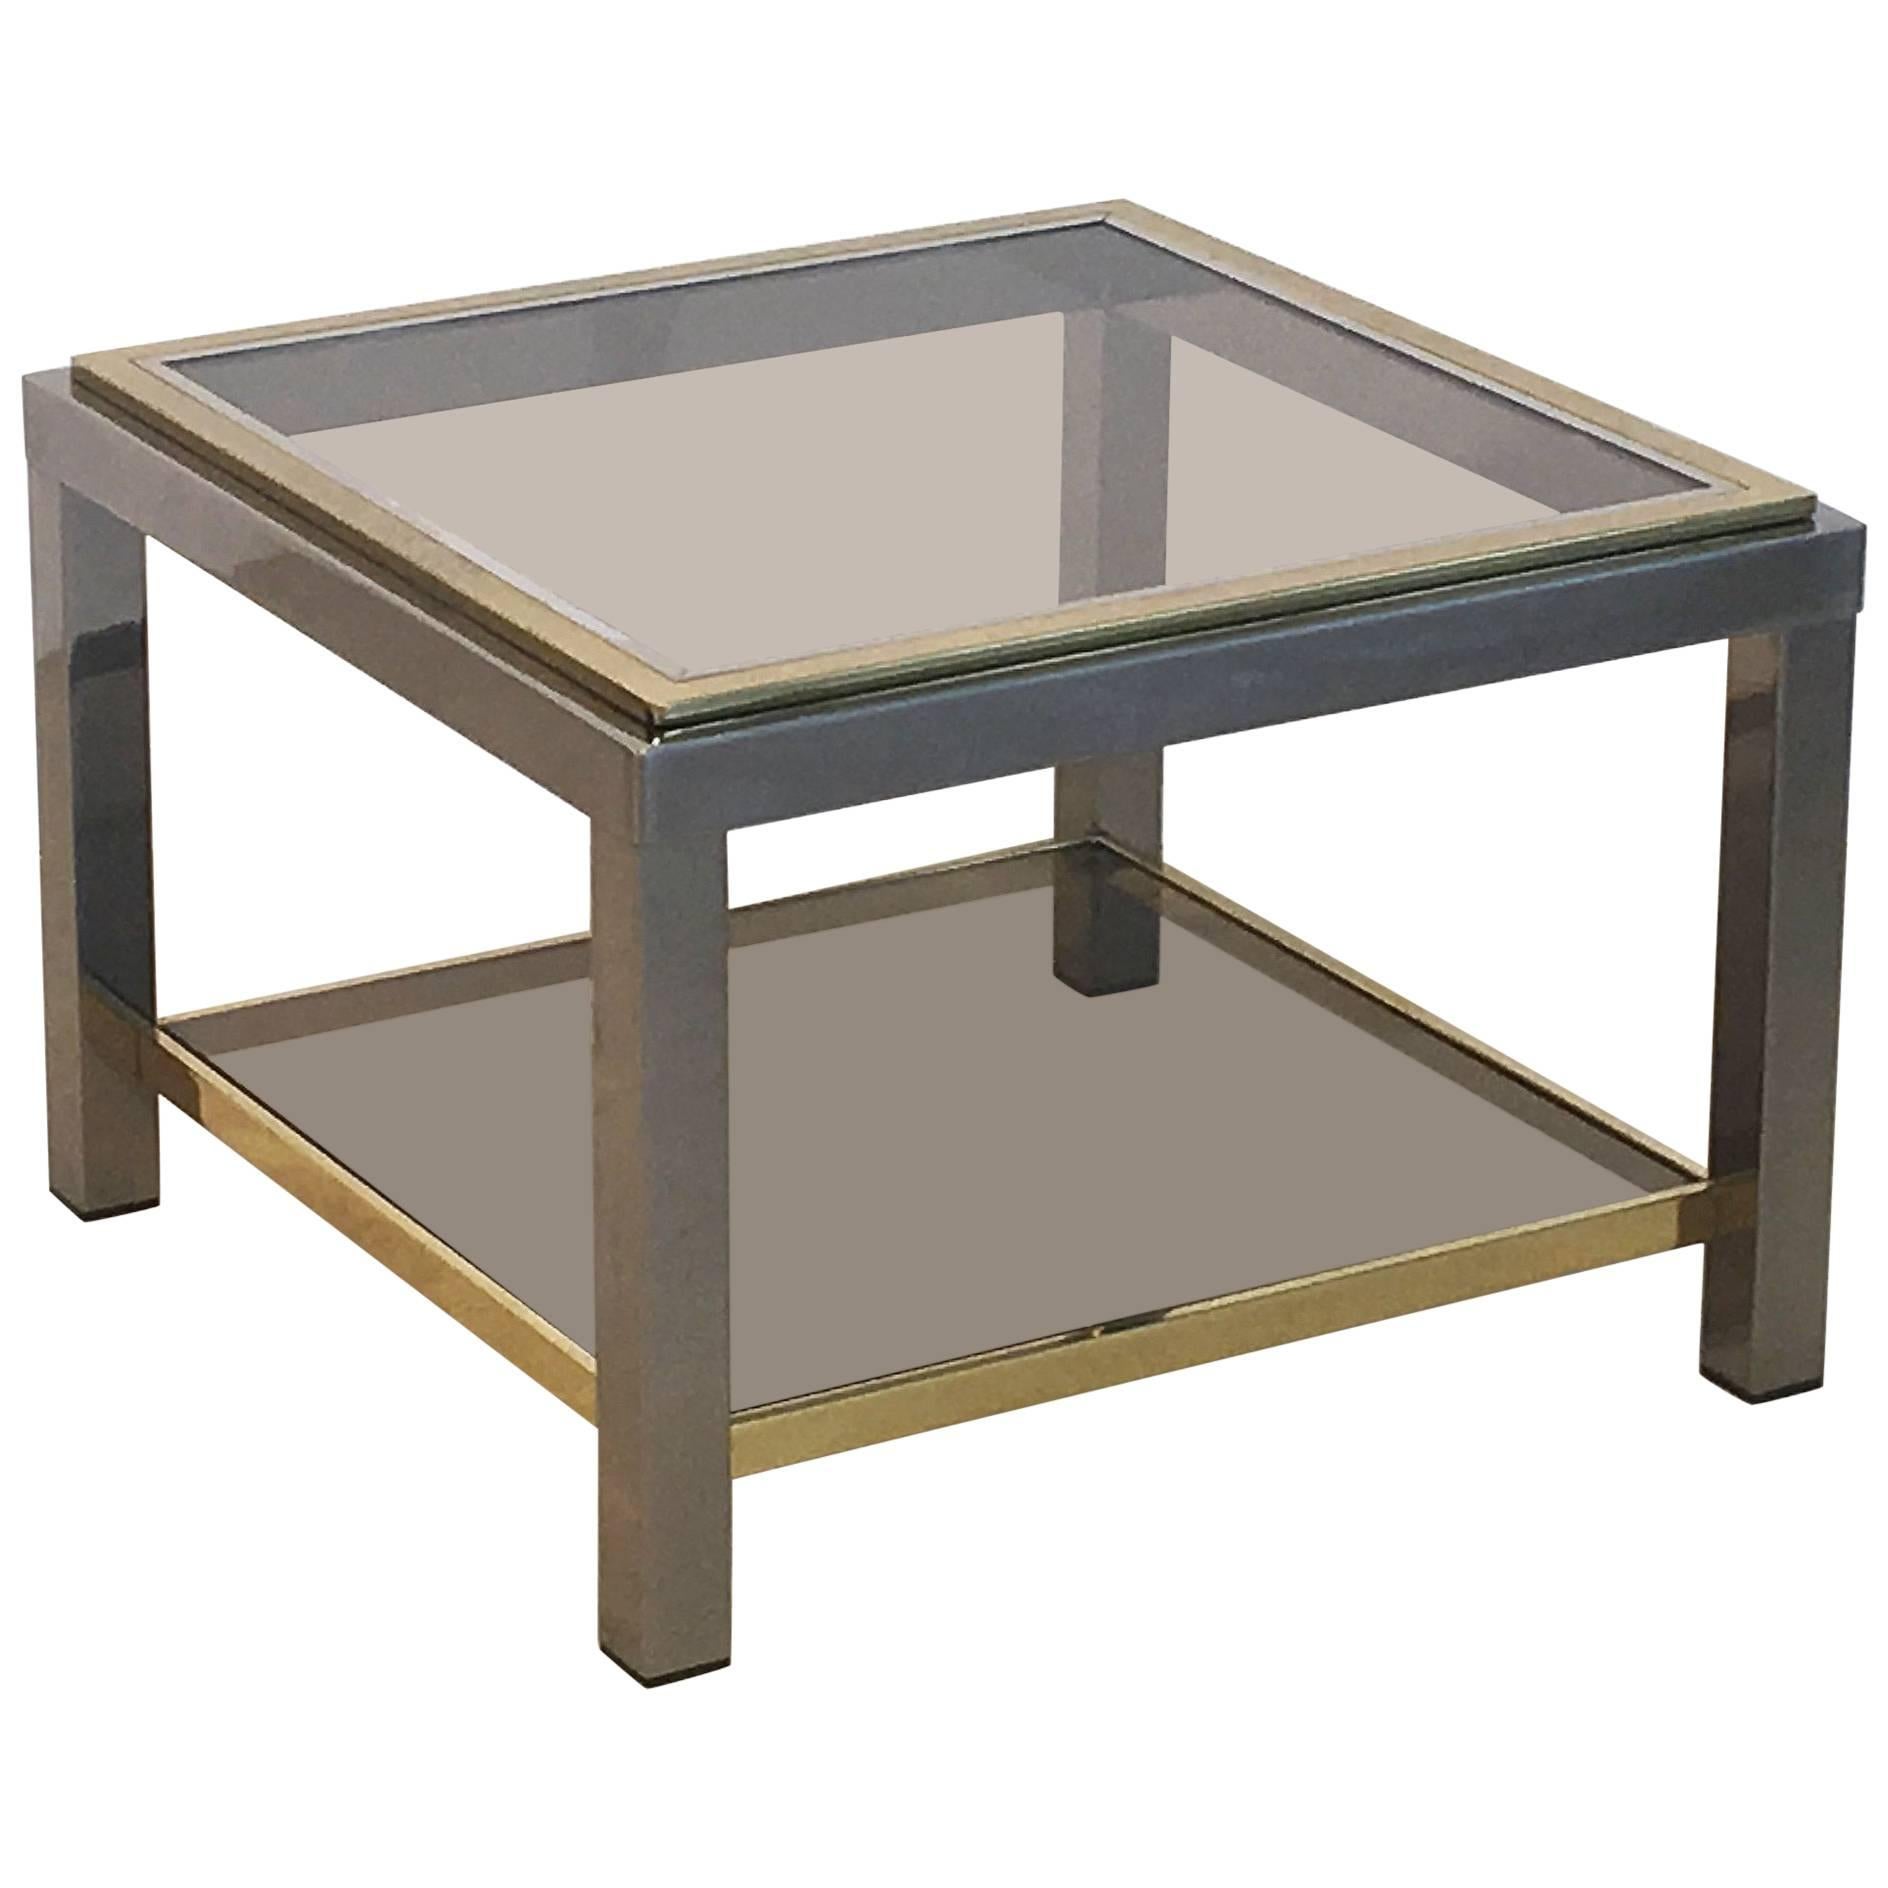 Italian Square Low Table of Brass, Chrome, and Smoked Glass by Zevi For Sale